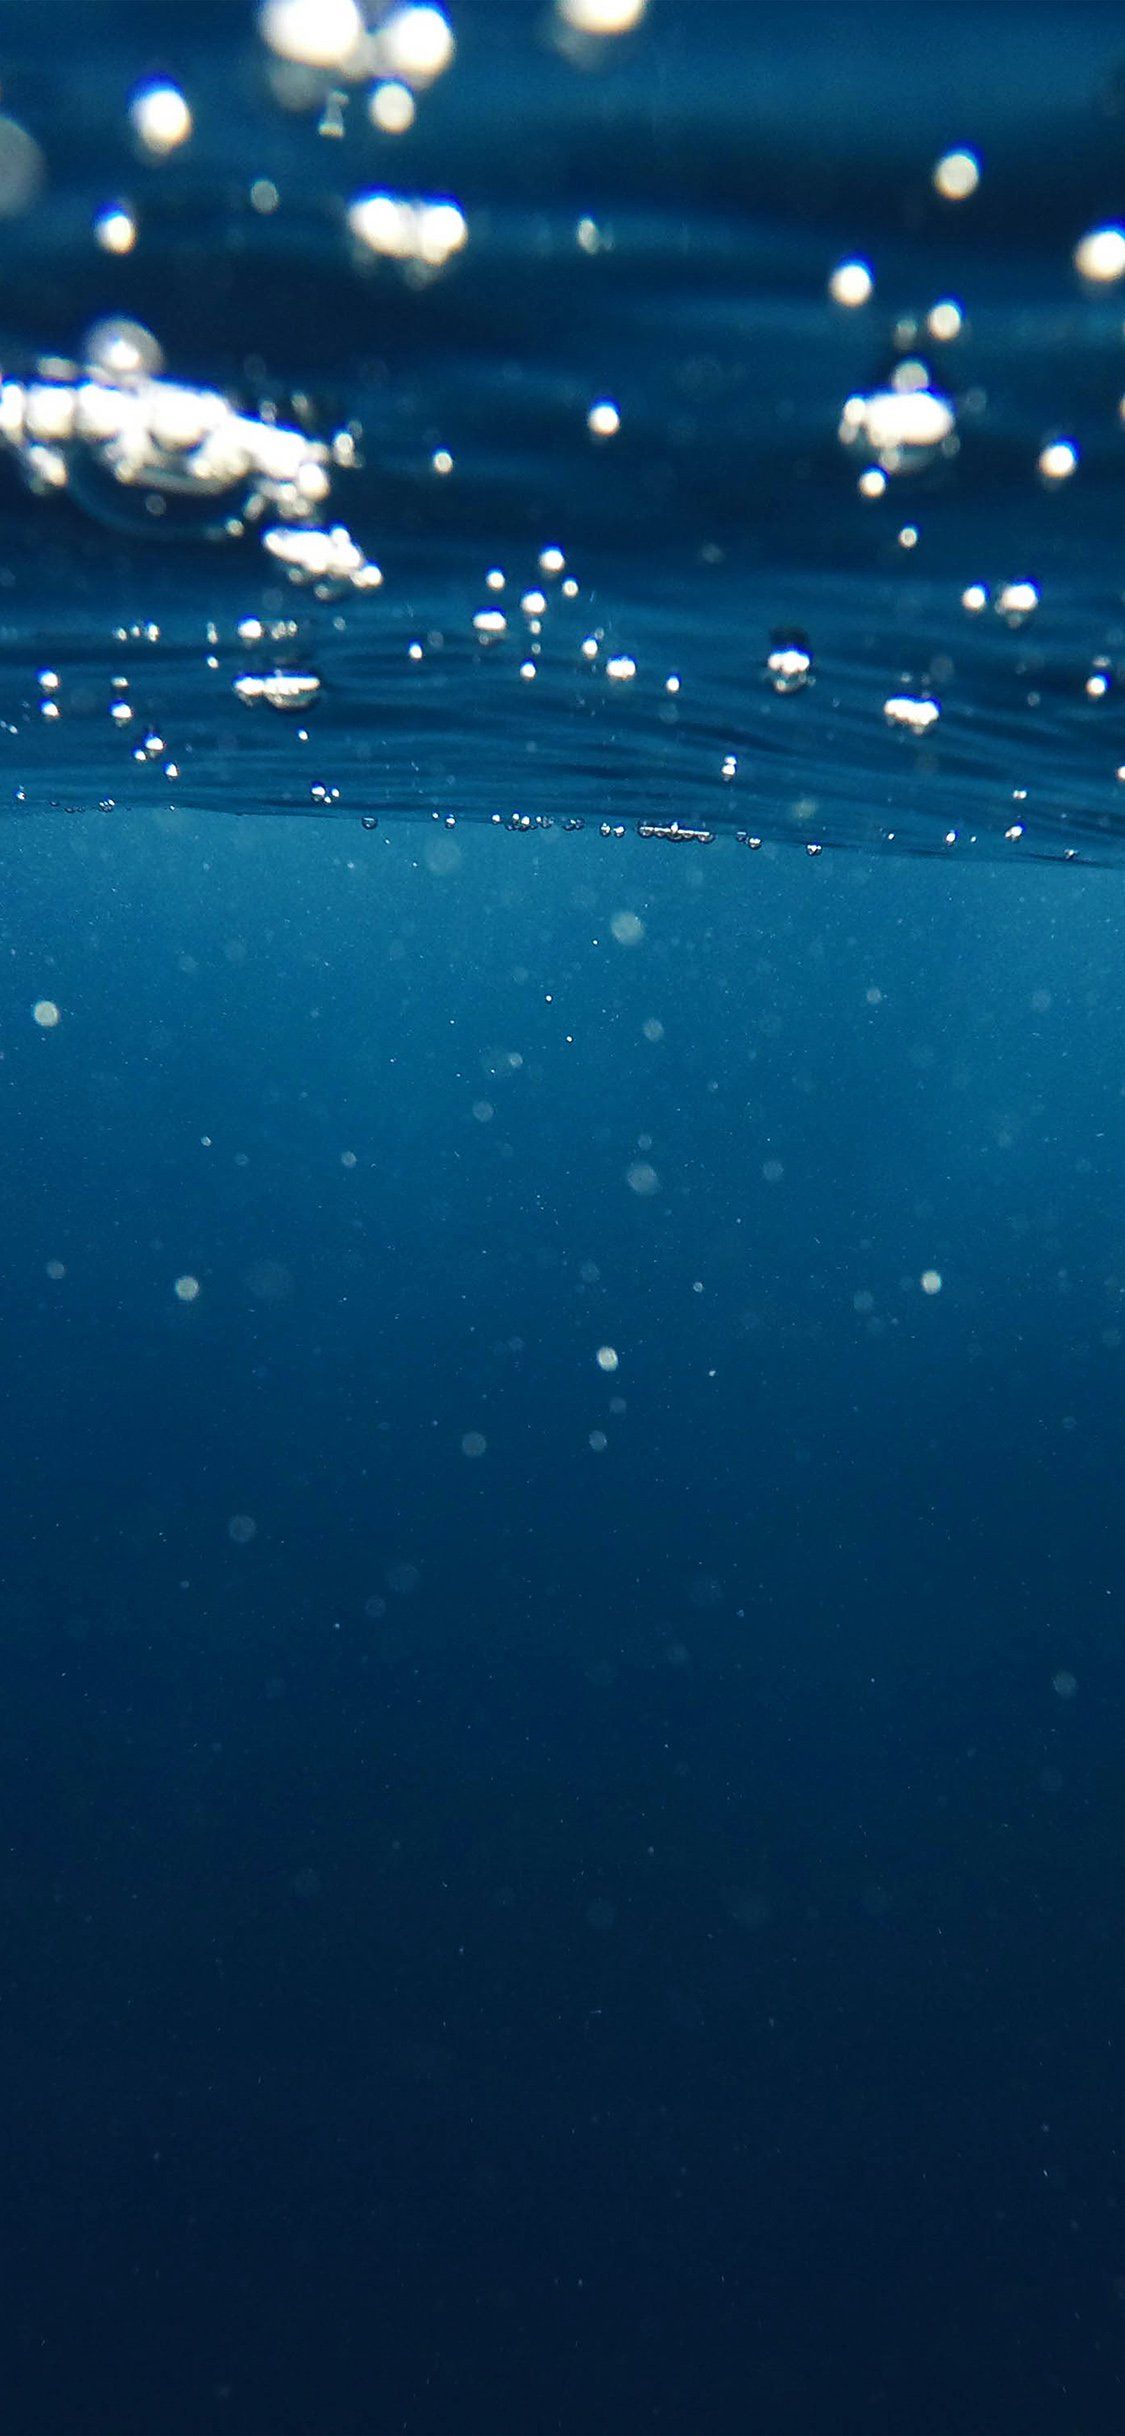 The surface of the water is filled with bubbles - Underwater